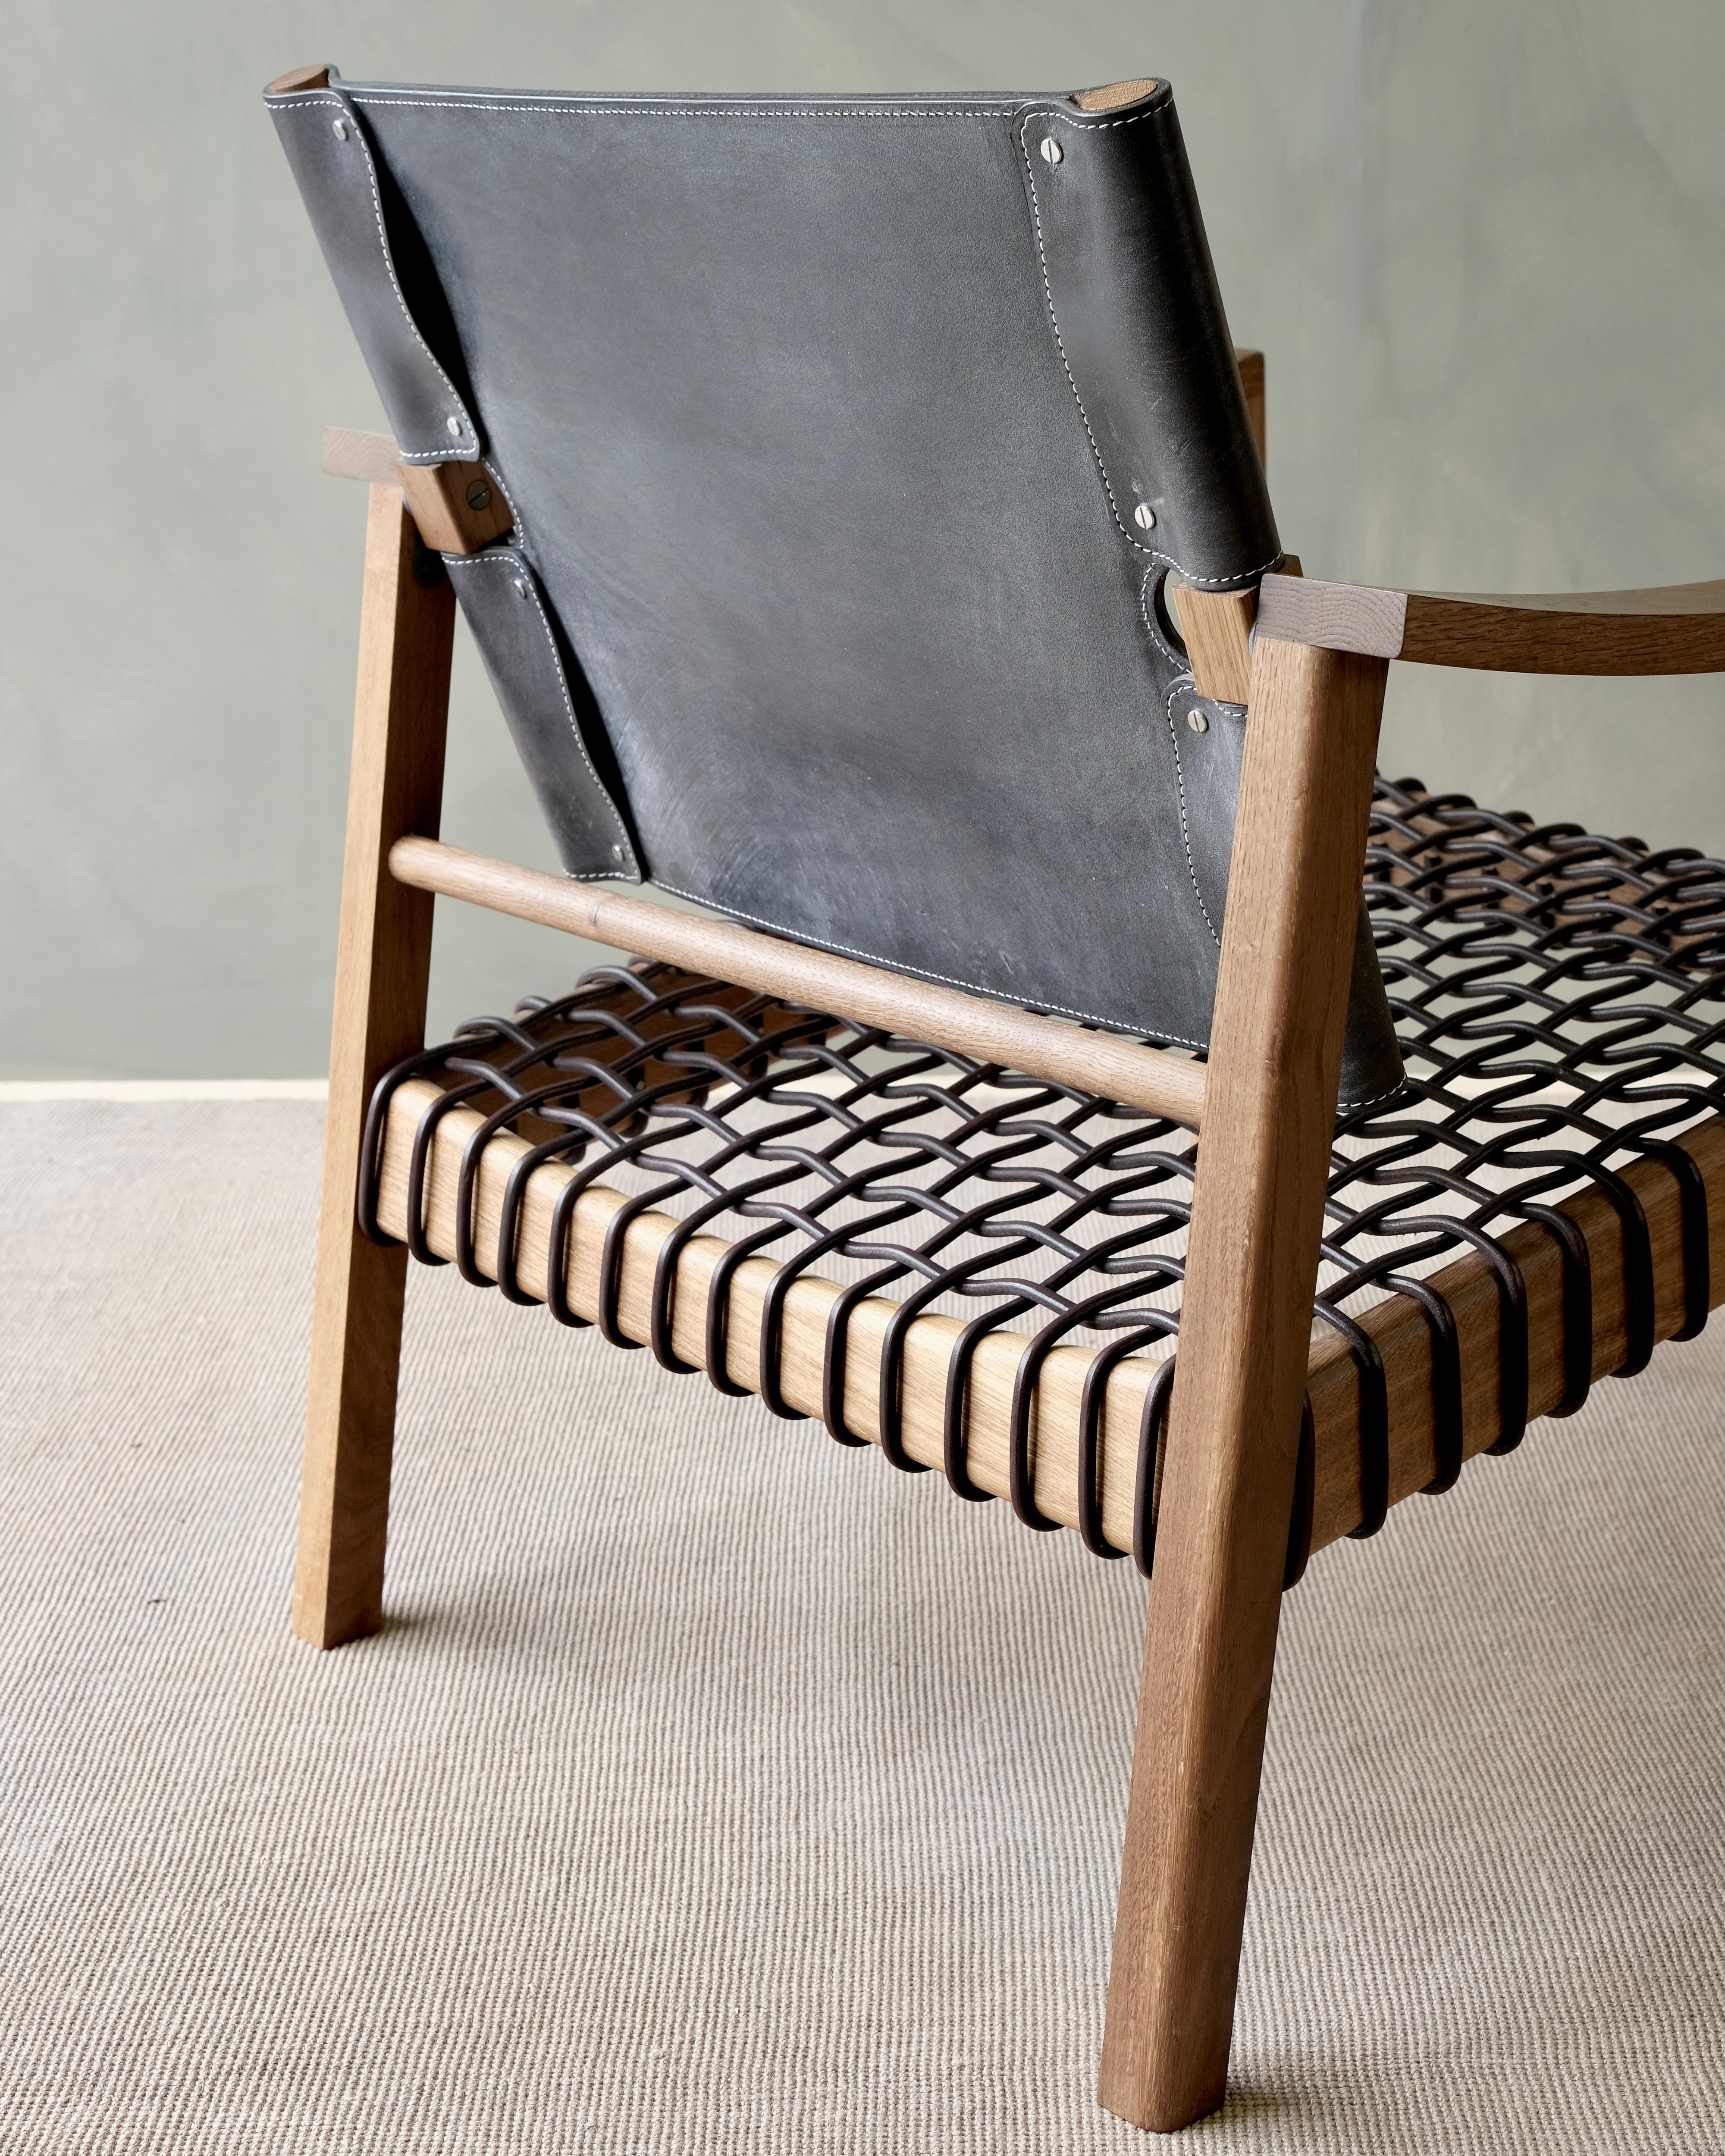 European Camber Chair - Black bridle leather and fumed oak For Sale